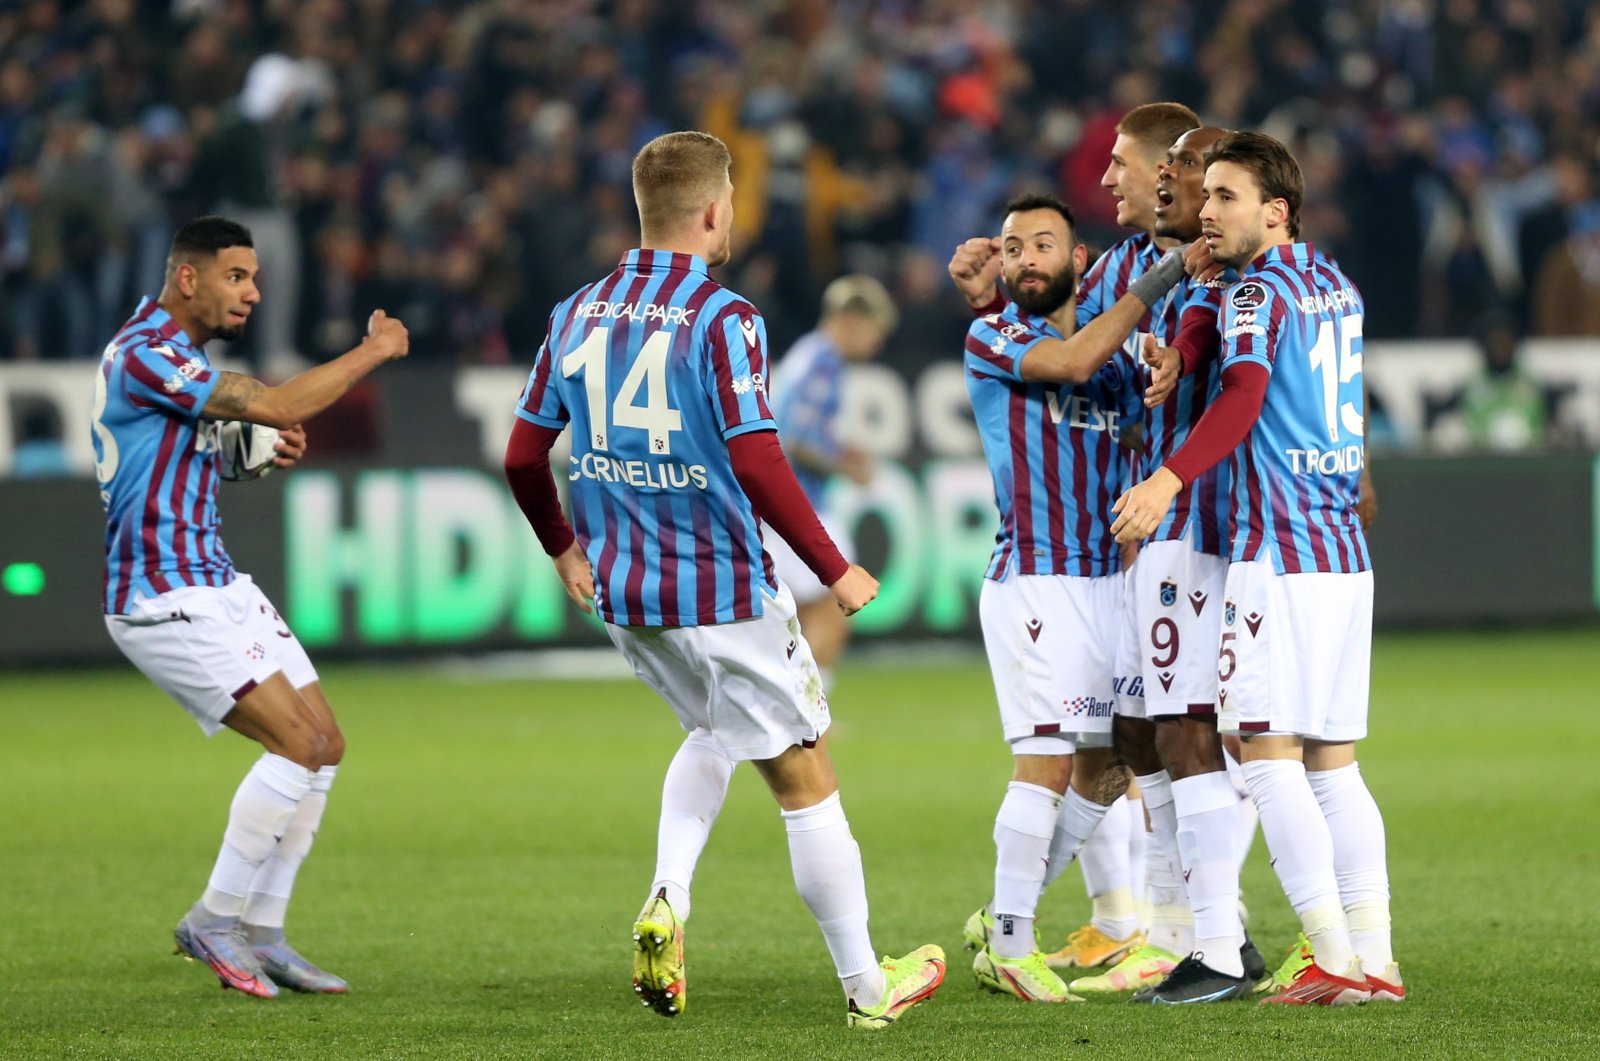 Trabzonspor players celebrate a goal against Göztepe in a Süper Lig match, Trabzon, Turkey, March 12, 2022. (AA Photo)